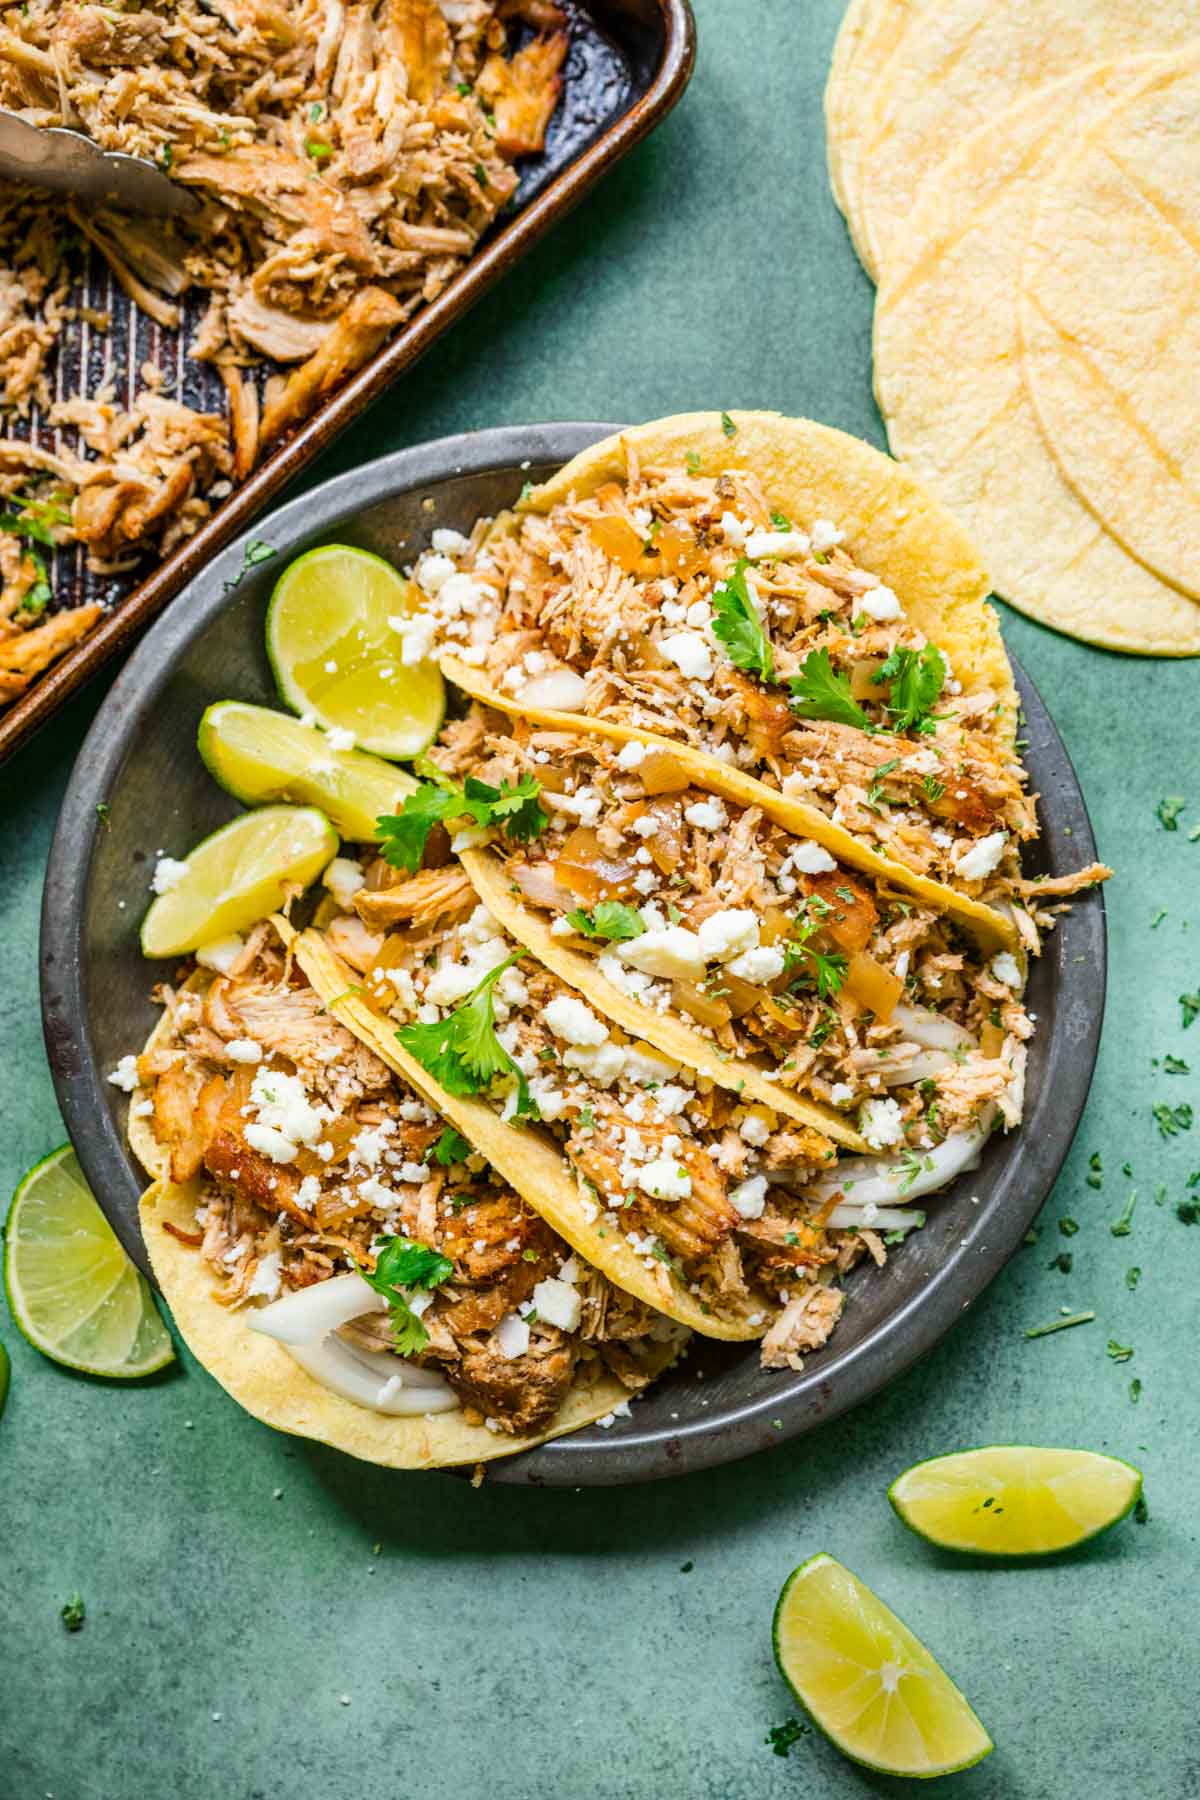 Slow Cooker Pork Carnitas four tacos on plate with cheese and cilantro